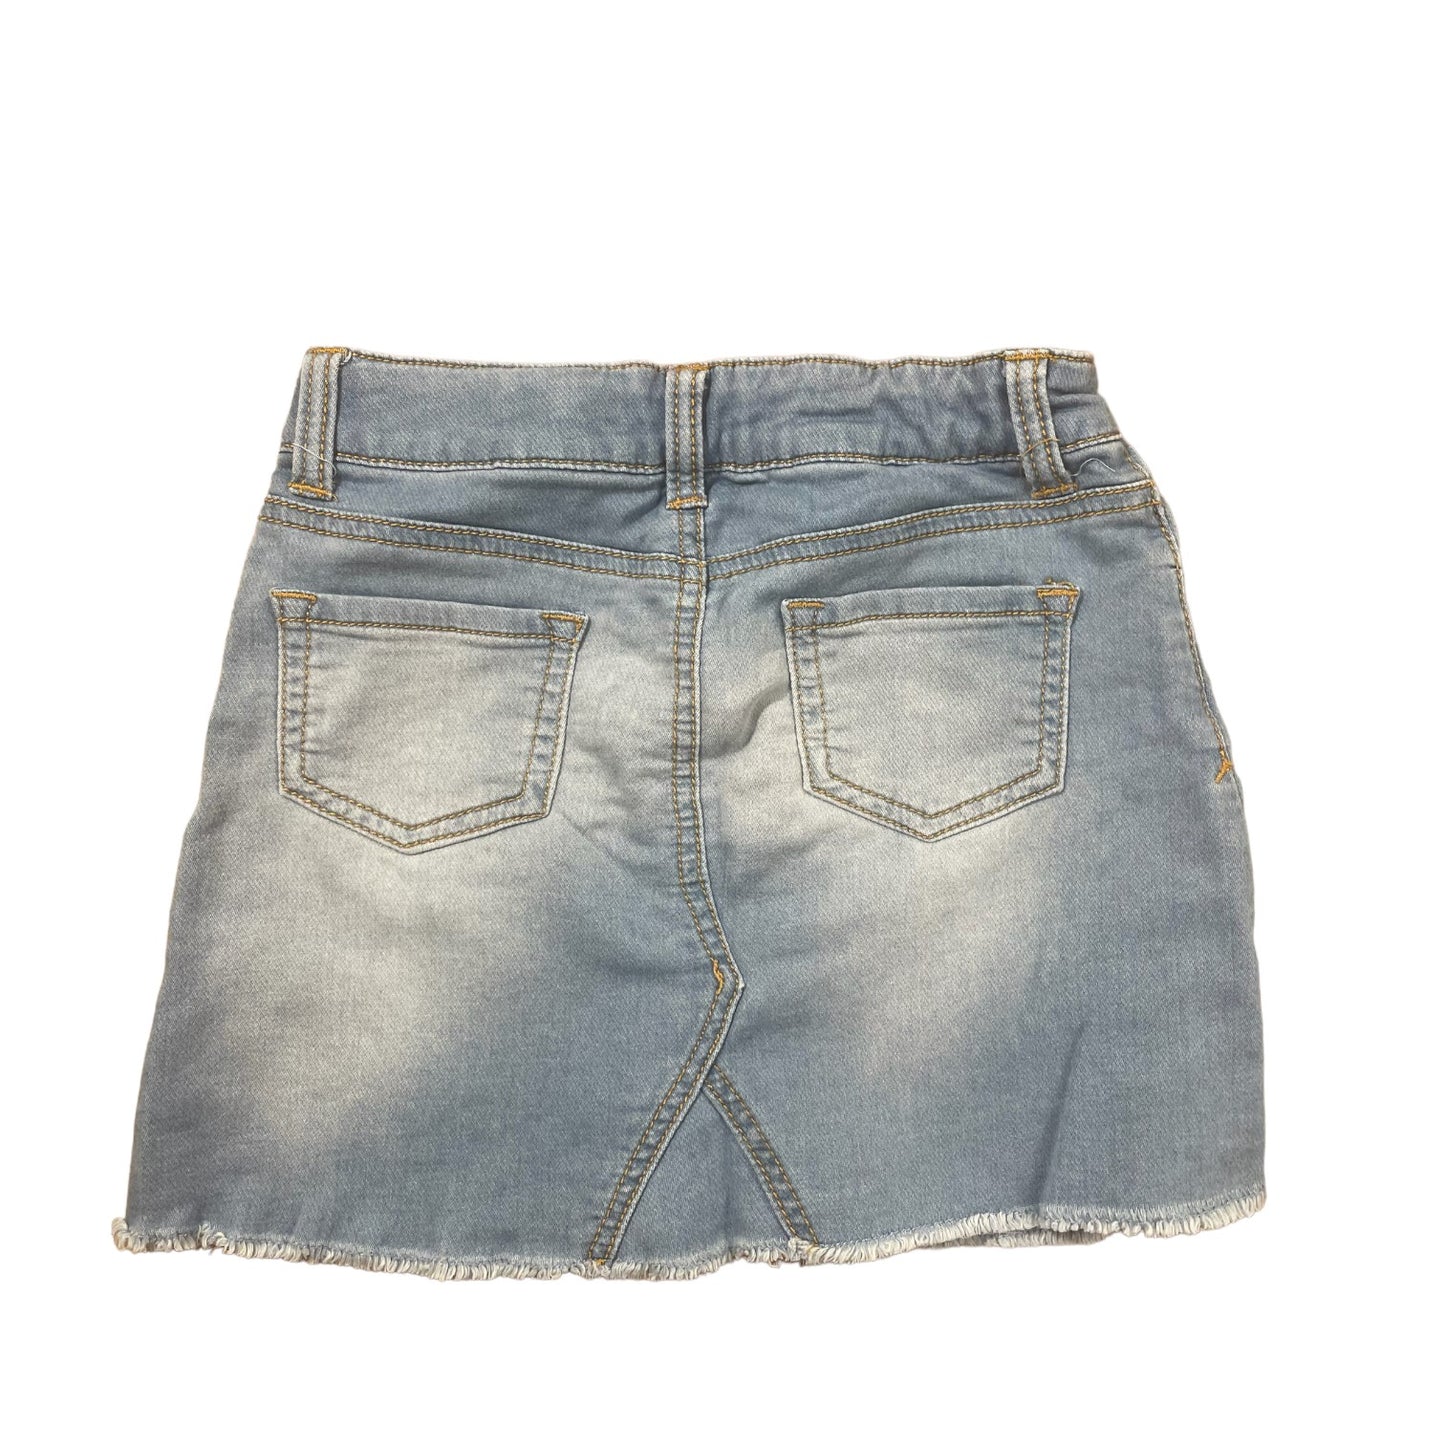 Cat and Jack Jean Skirt Size 6-6X